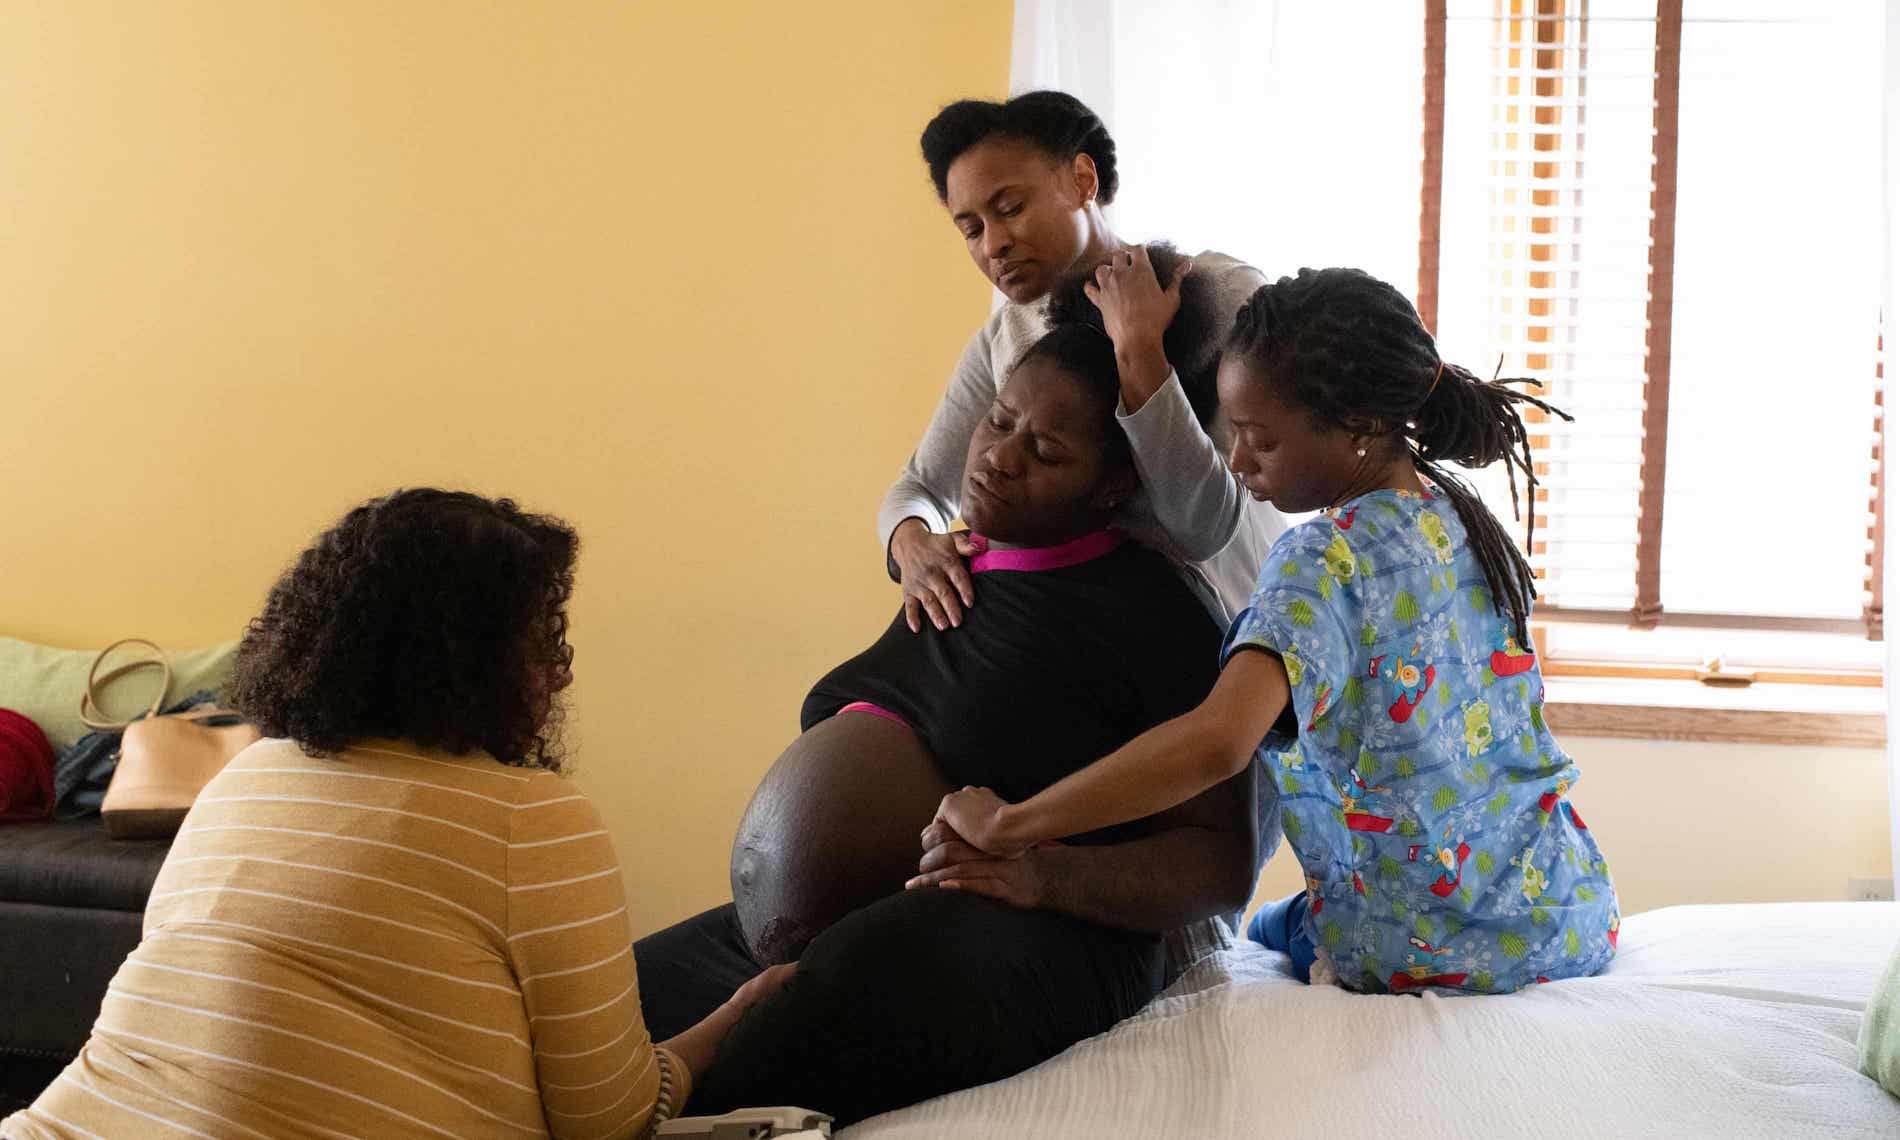 Rebecca Polston, a midwife, watches Em’Mae Alexander labor with the support of her mother, Tulani Alexander and her doula, Lakesha Gordon at Roots Community Birth Center. Alice Proujansky/The Guardian